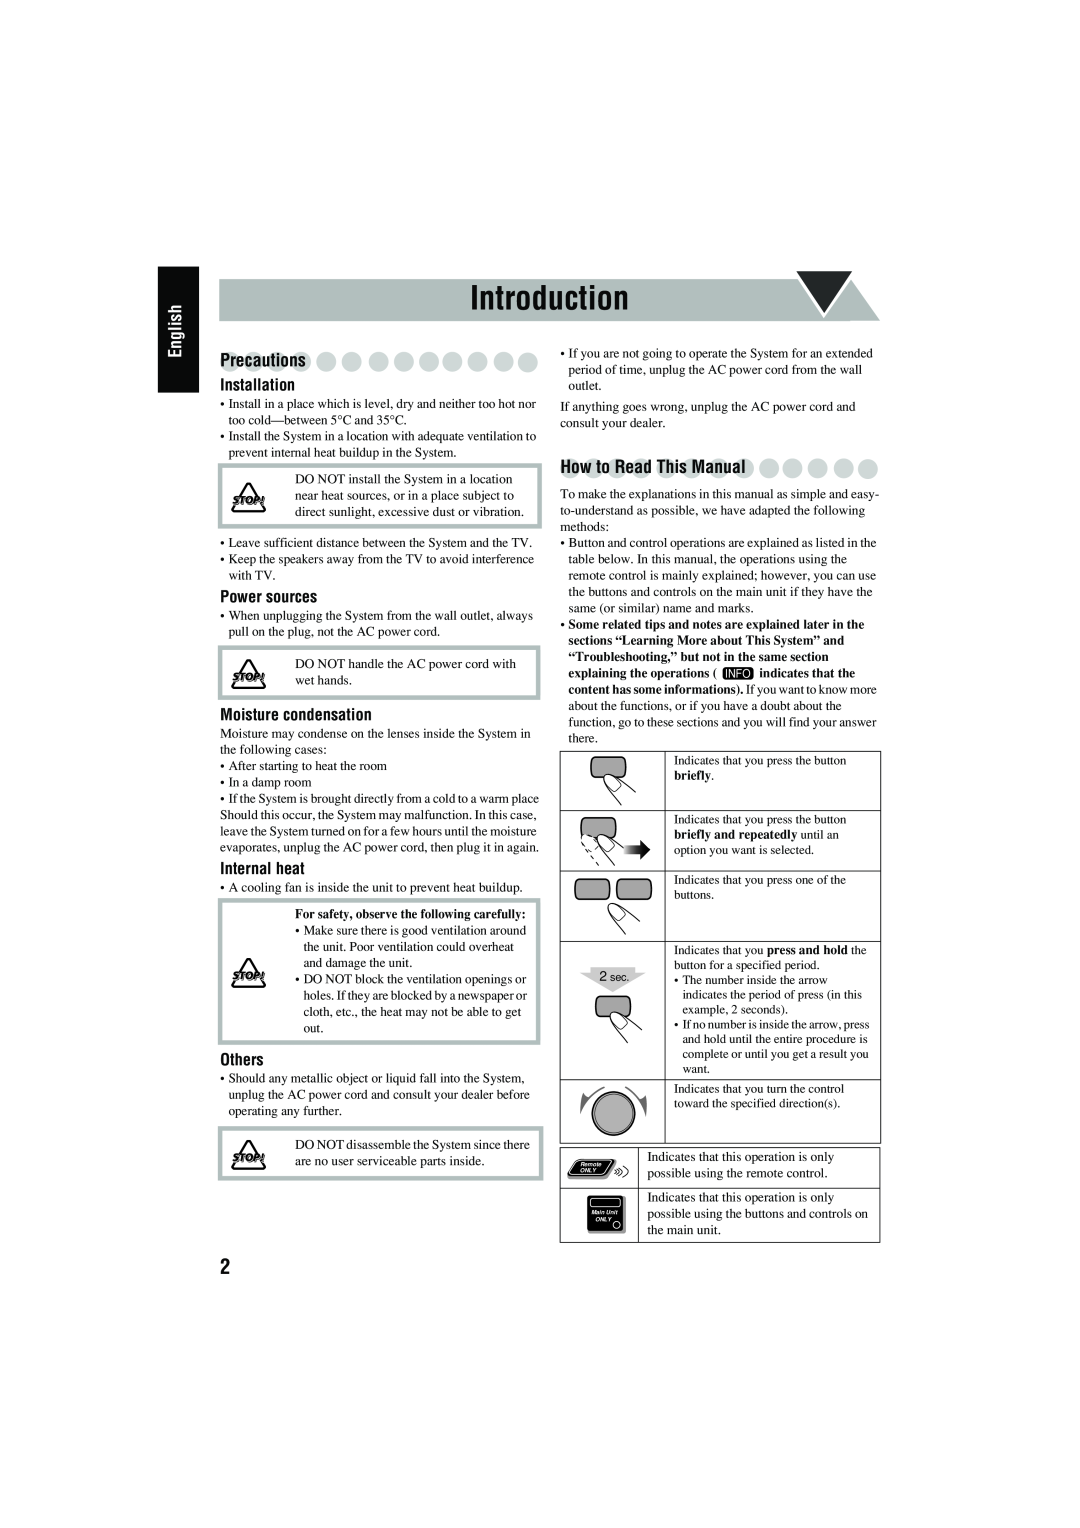 JVC CA-MXJD8 manual Introduction, English, Precautions, How to Read This Manual, Installation, Power sources, Internal heat 